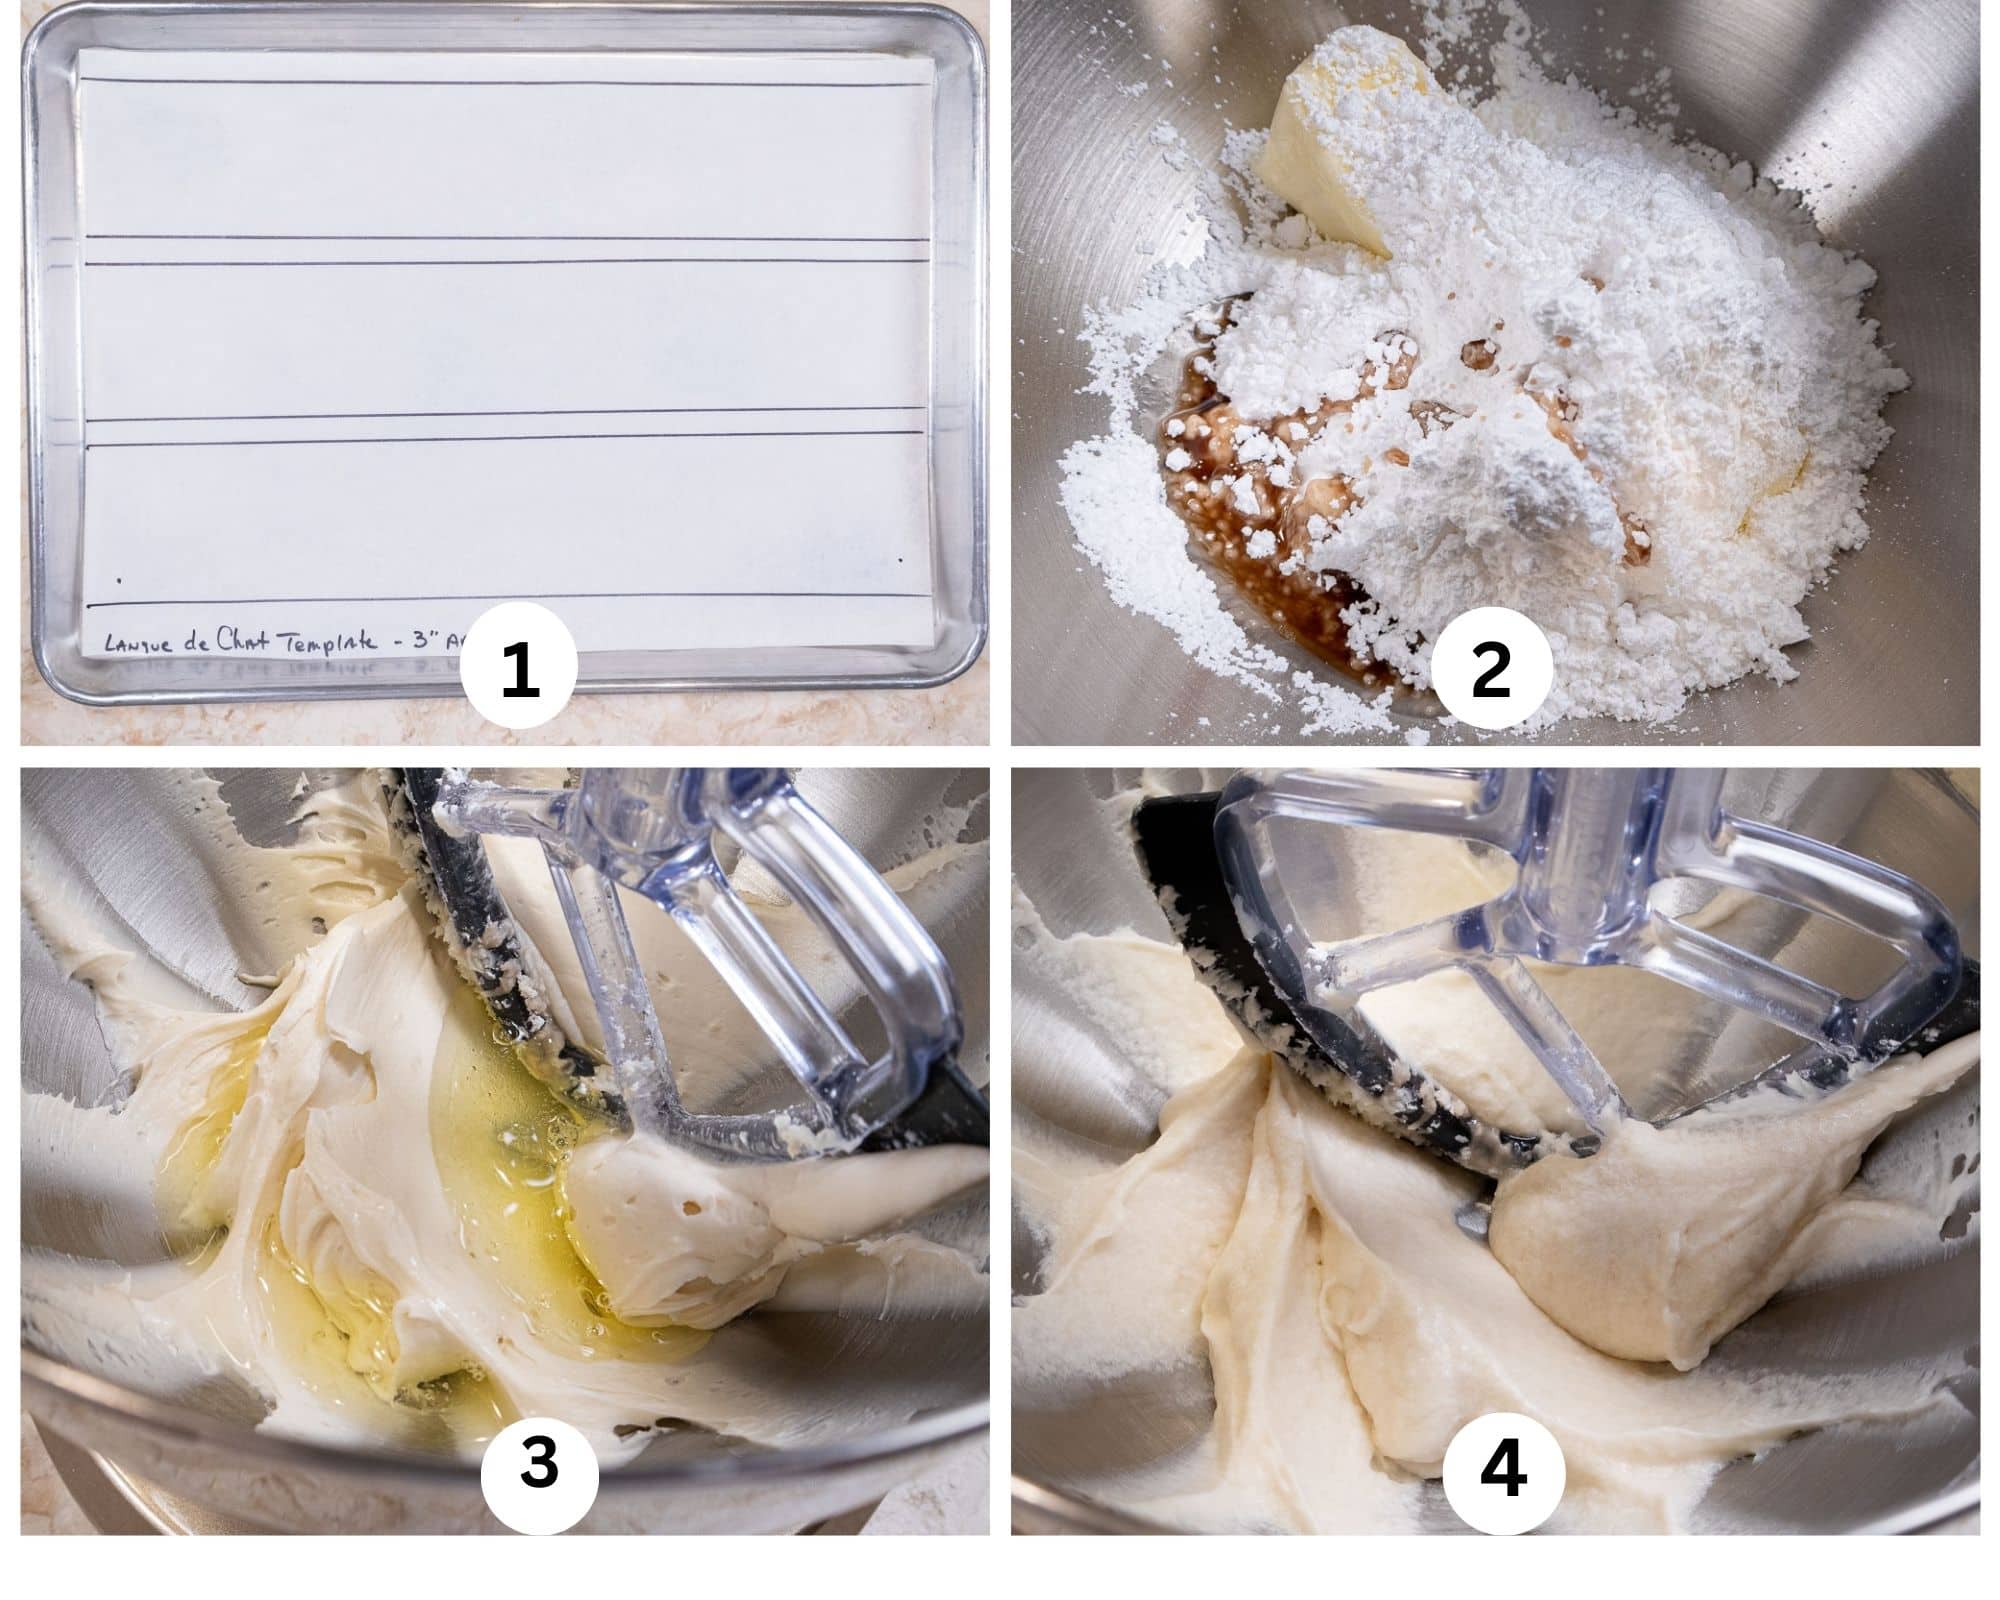 The first collage for the Lange de Chat features the template, the butter, vanilla and powdered sugar in the mixing bowl, the egg white added and the batter mixed.